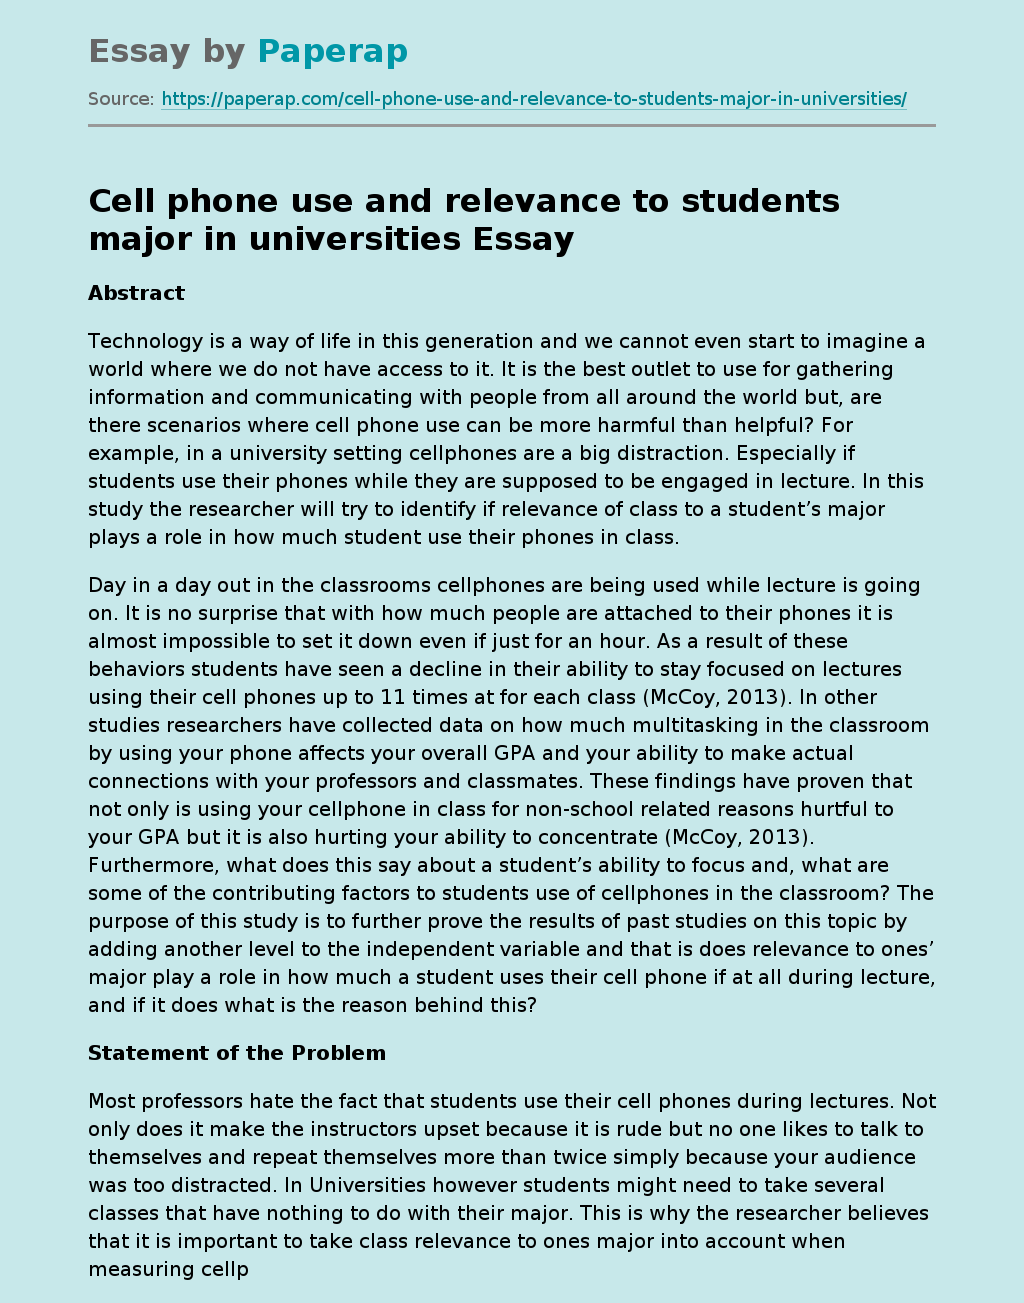 Cell phone use and relevance to students major in universities